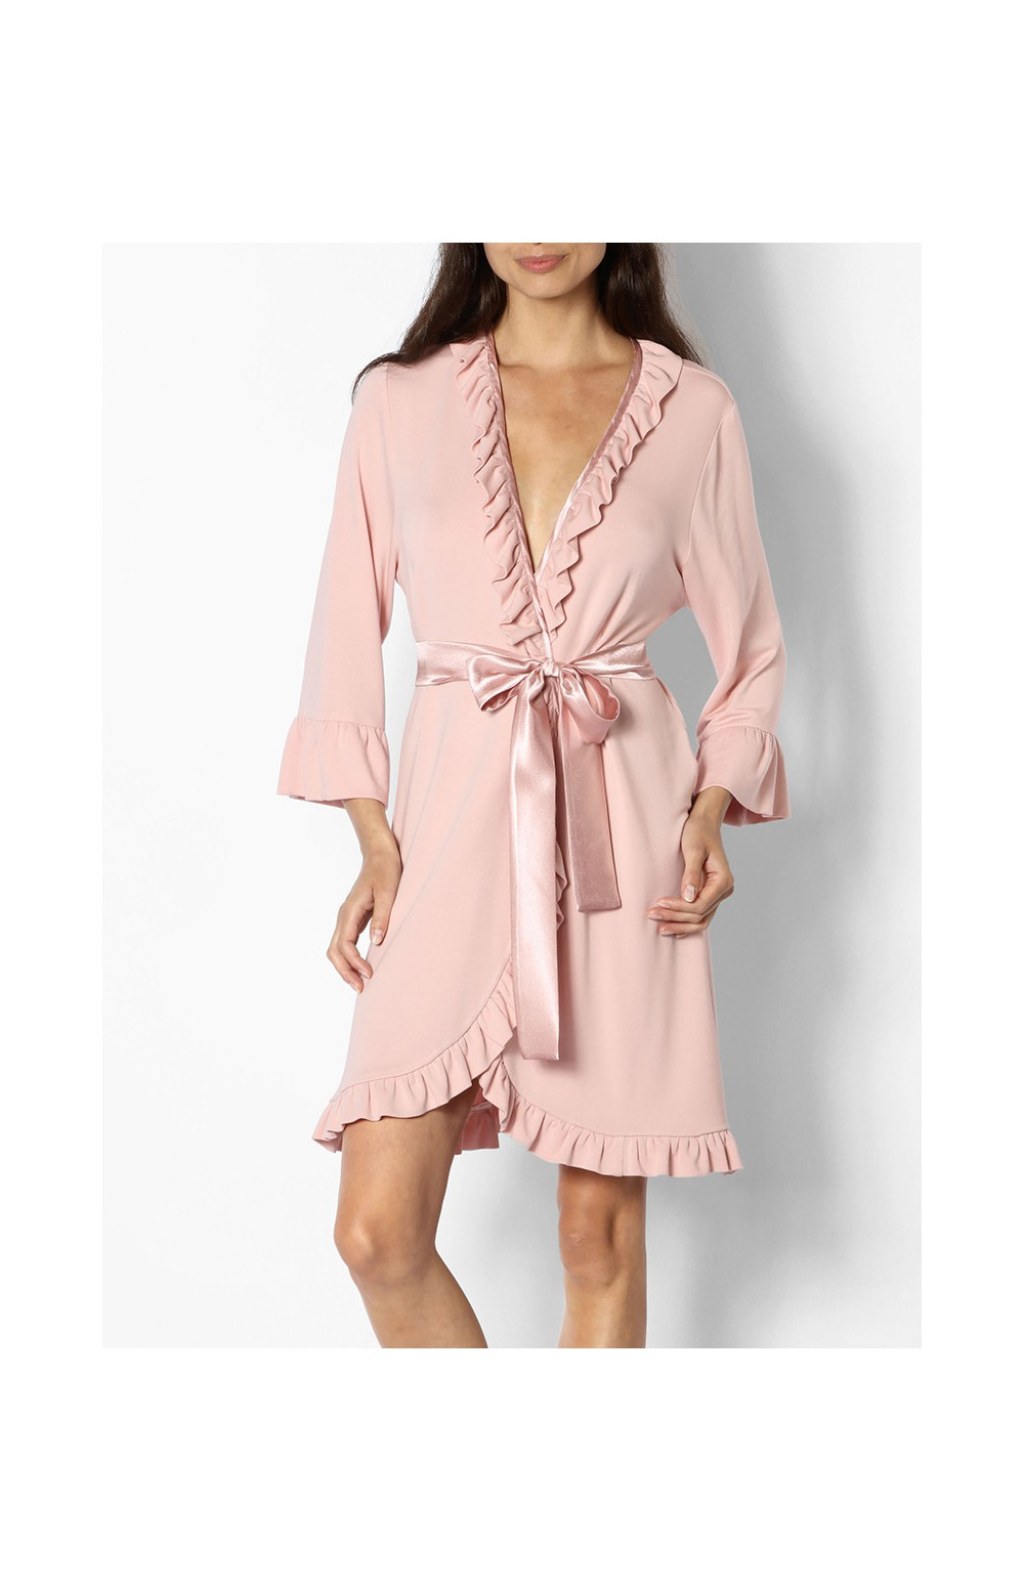 Picture of: Romantic knee-length dressing gown with satin tie belt